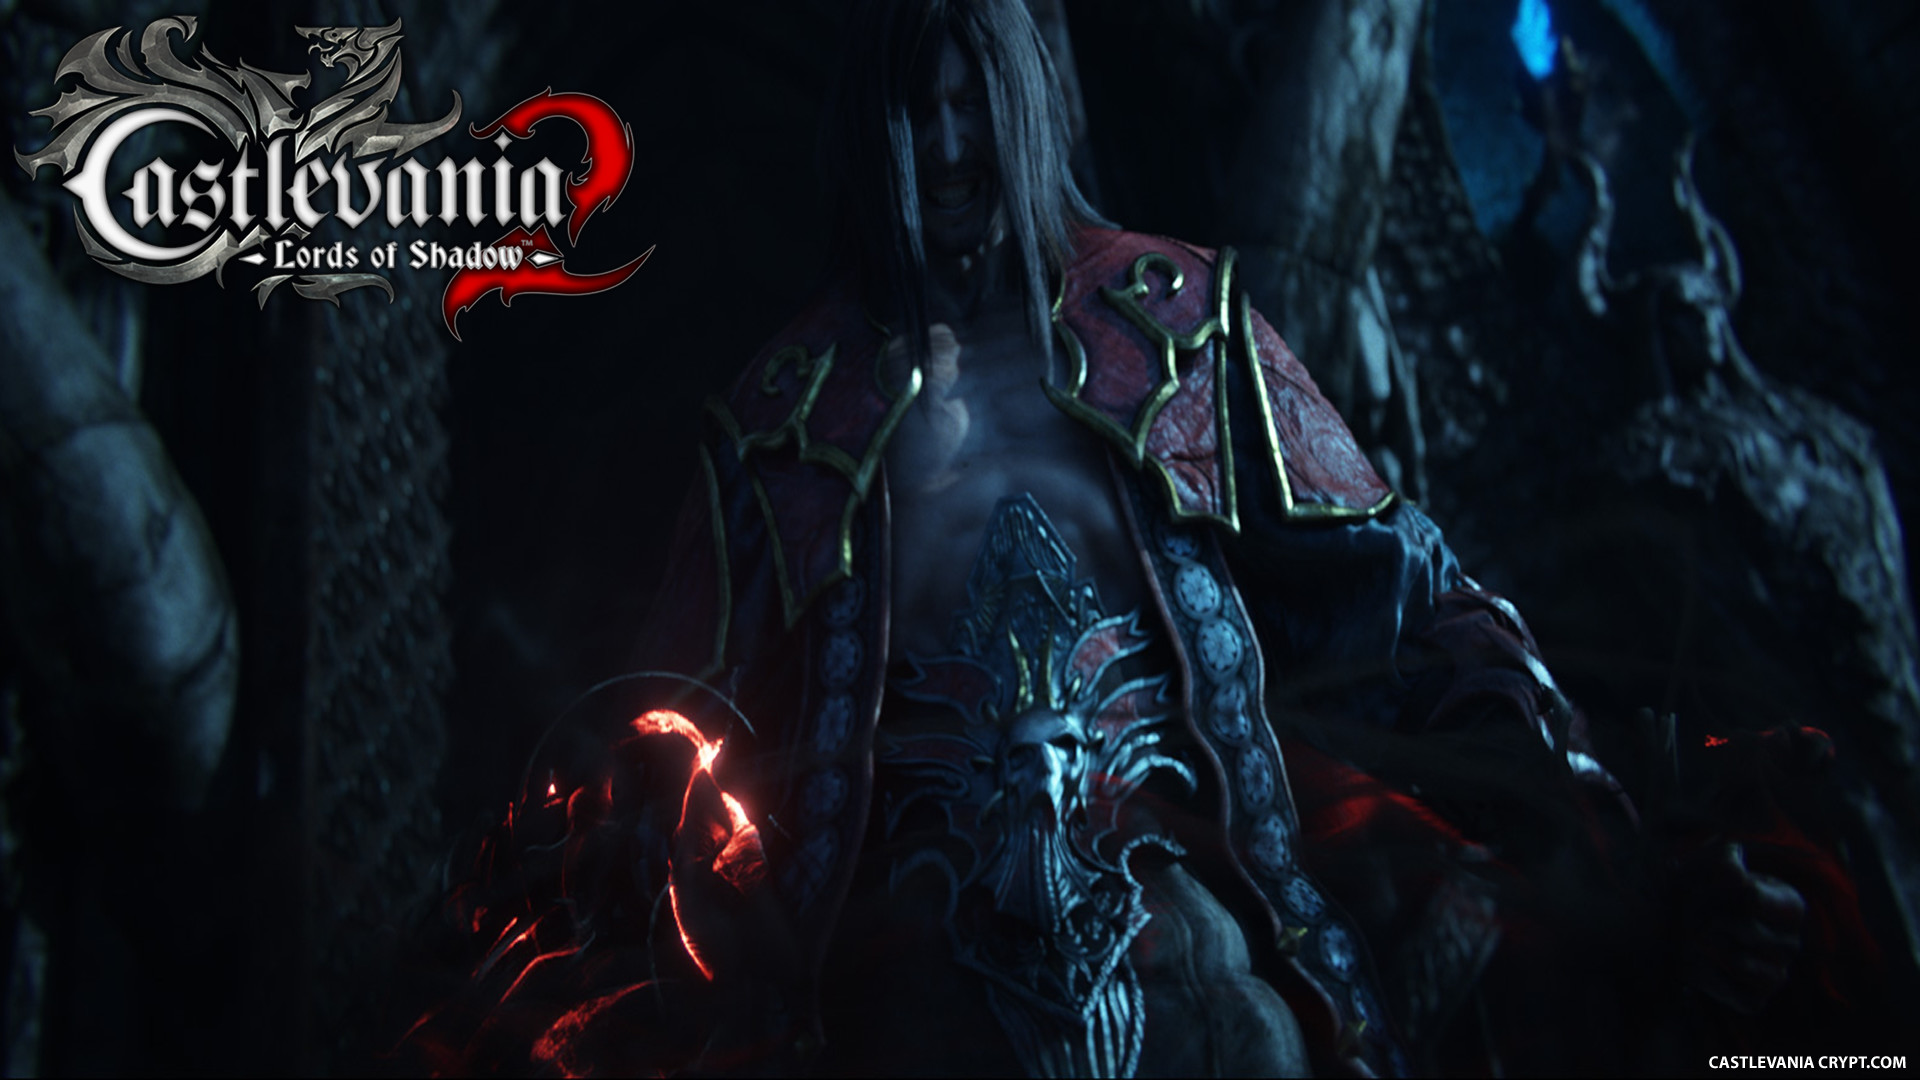 1920x1080 Castlevania: Lords Of Shadow 2 Full HD Wallpaper